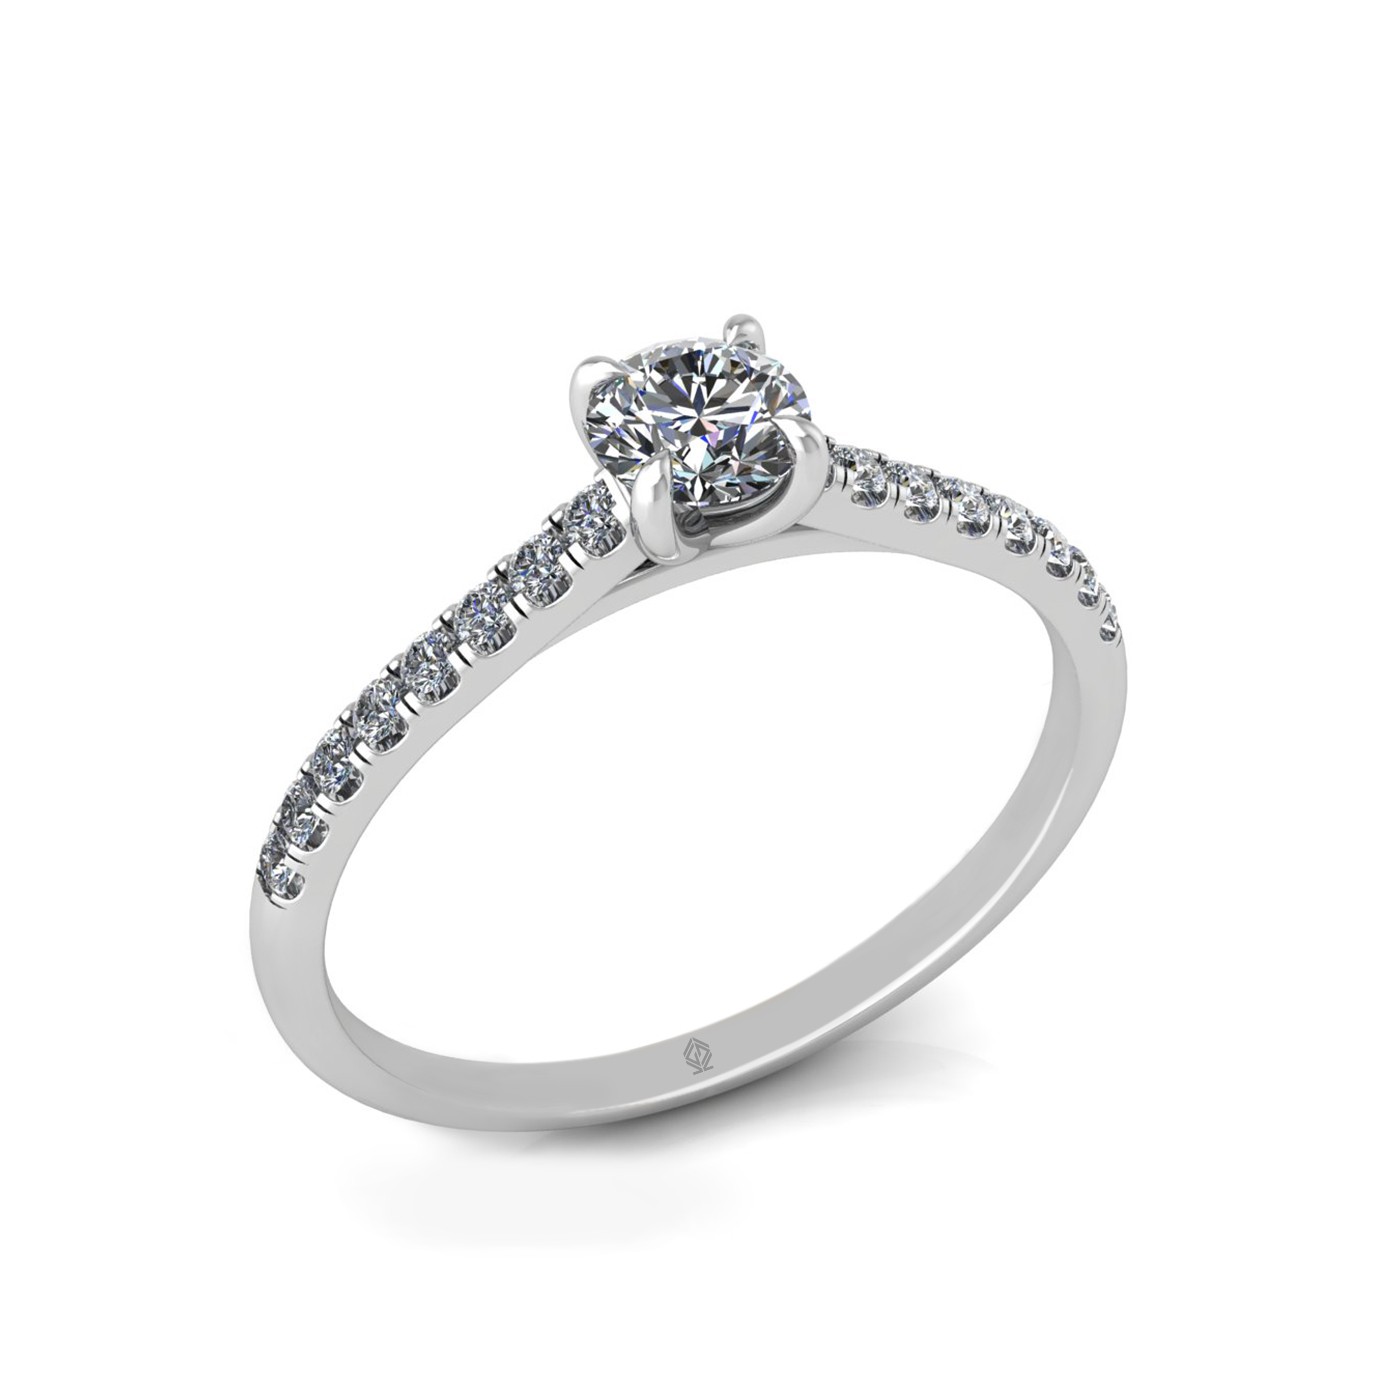 18k white gold  0,30 ct 4 prongs round cut diamond engagement ring with whisper thin pavÉ set band